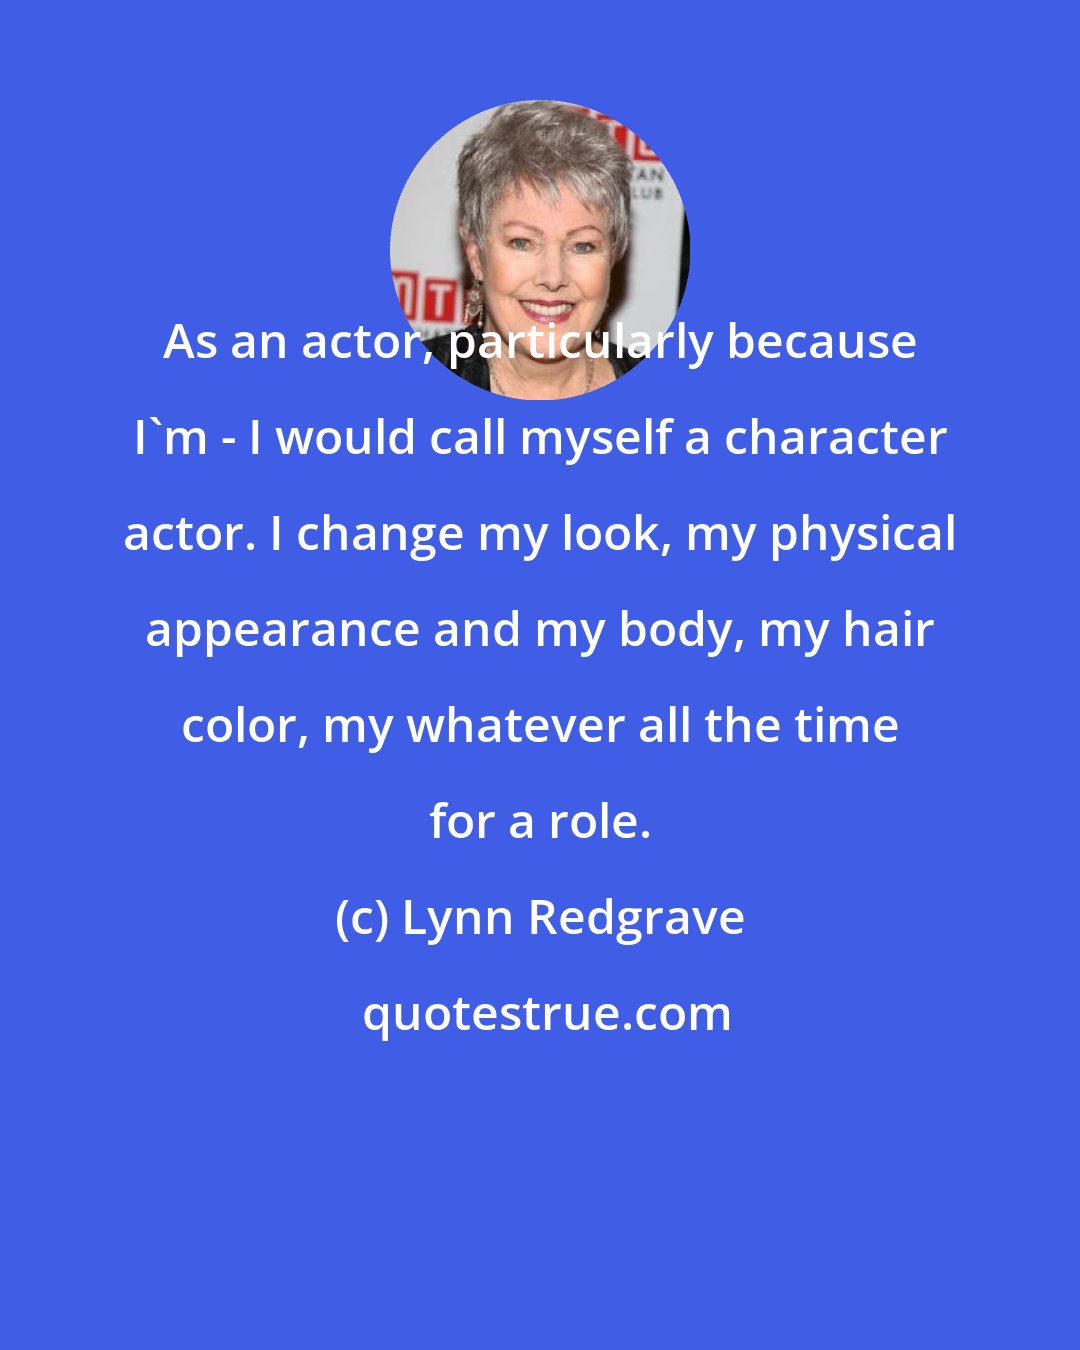 Lynn Redgrave: As an actor, particularly because I'm - I would call myself a character actor. I change my look, my physical appearance and my body, my hair color, my whatever all the time for a role.